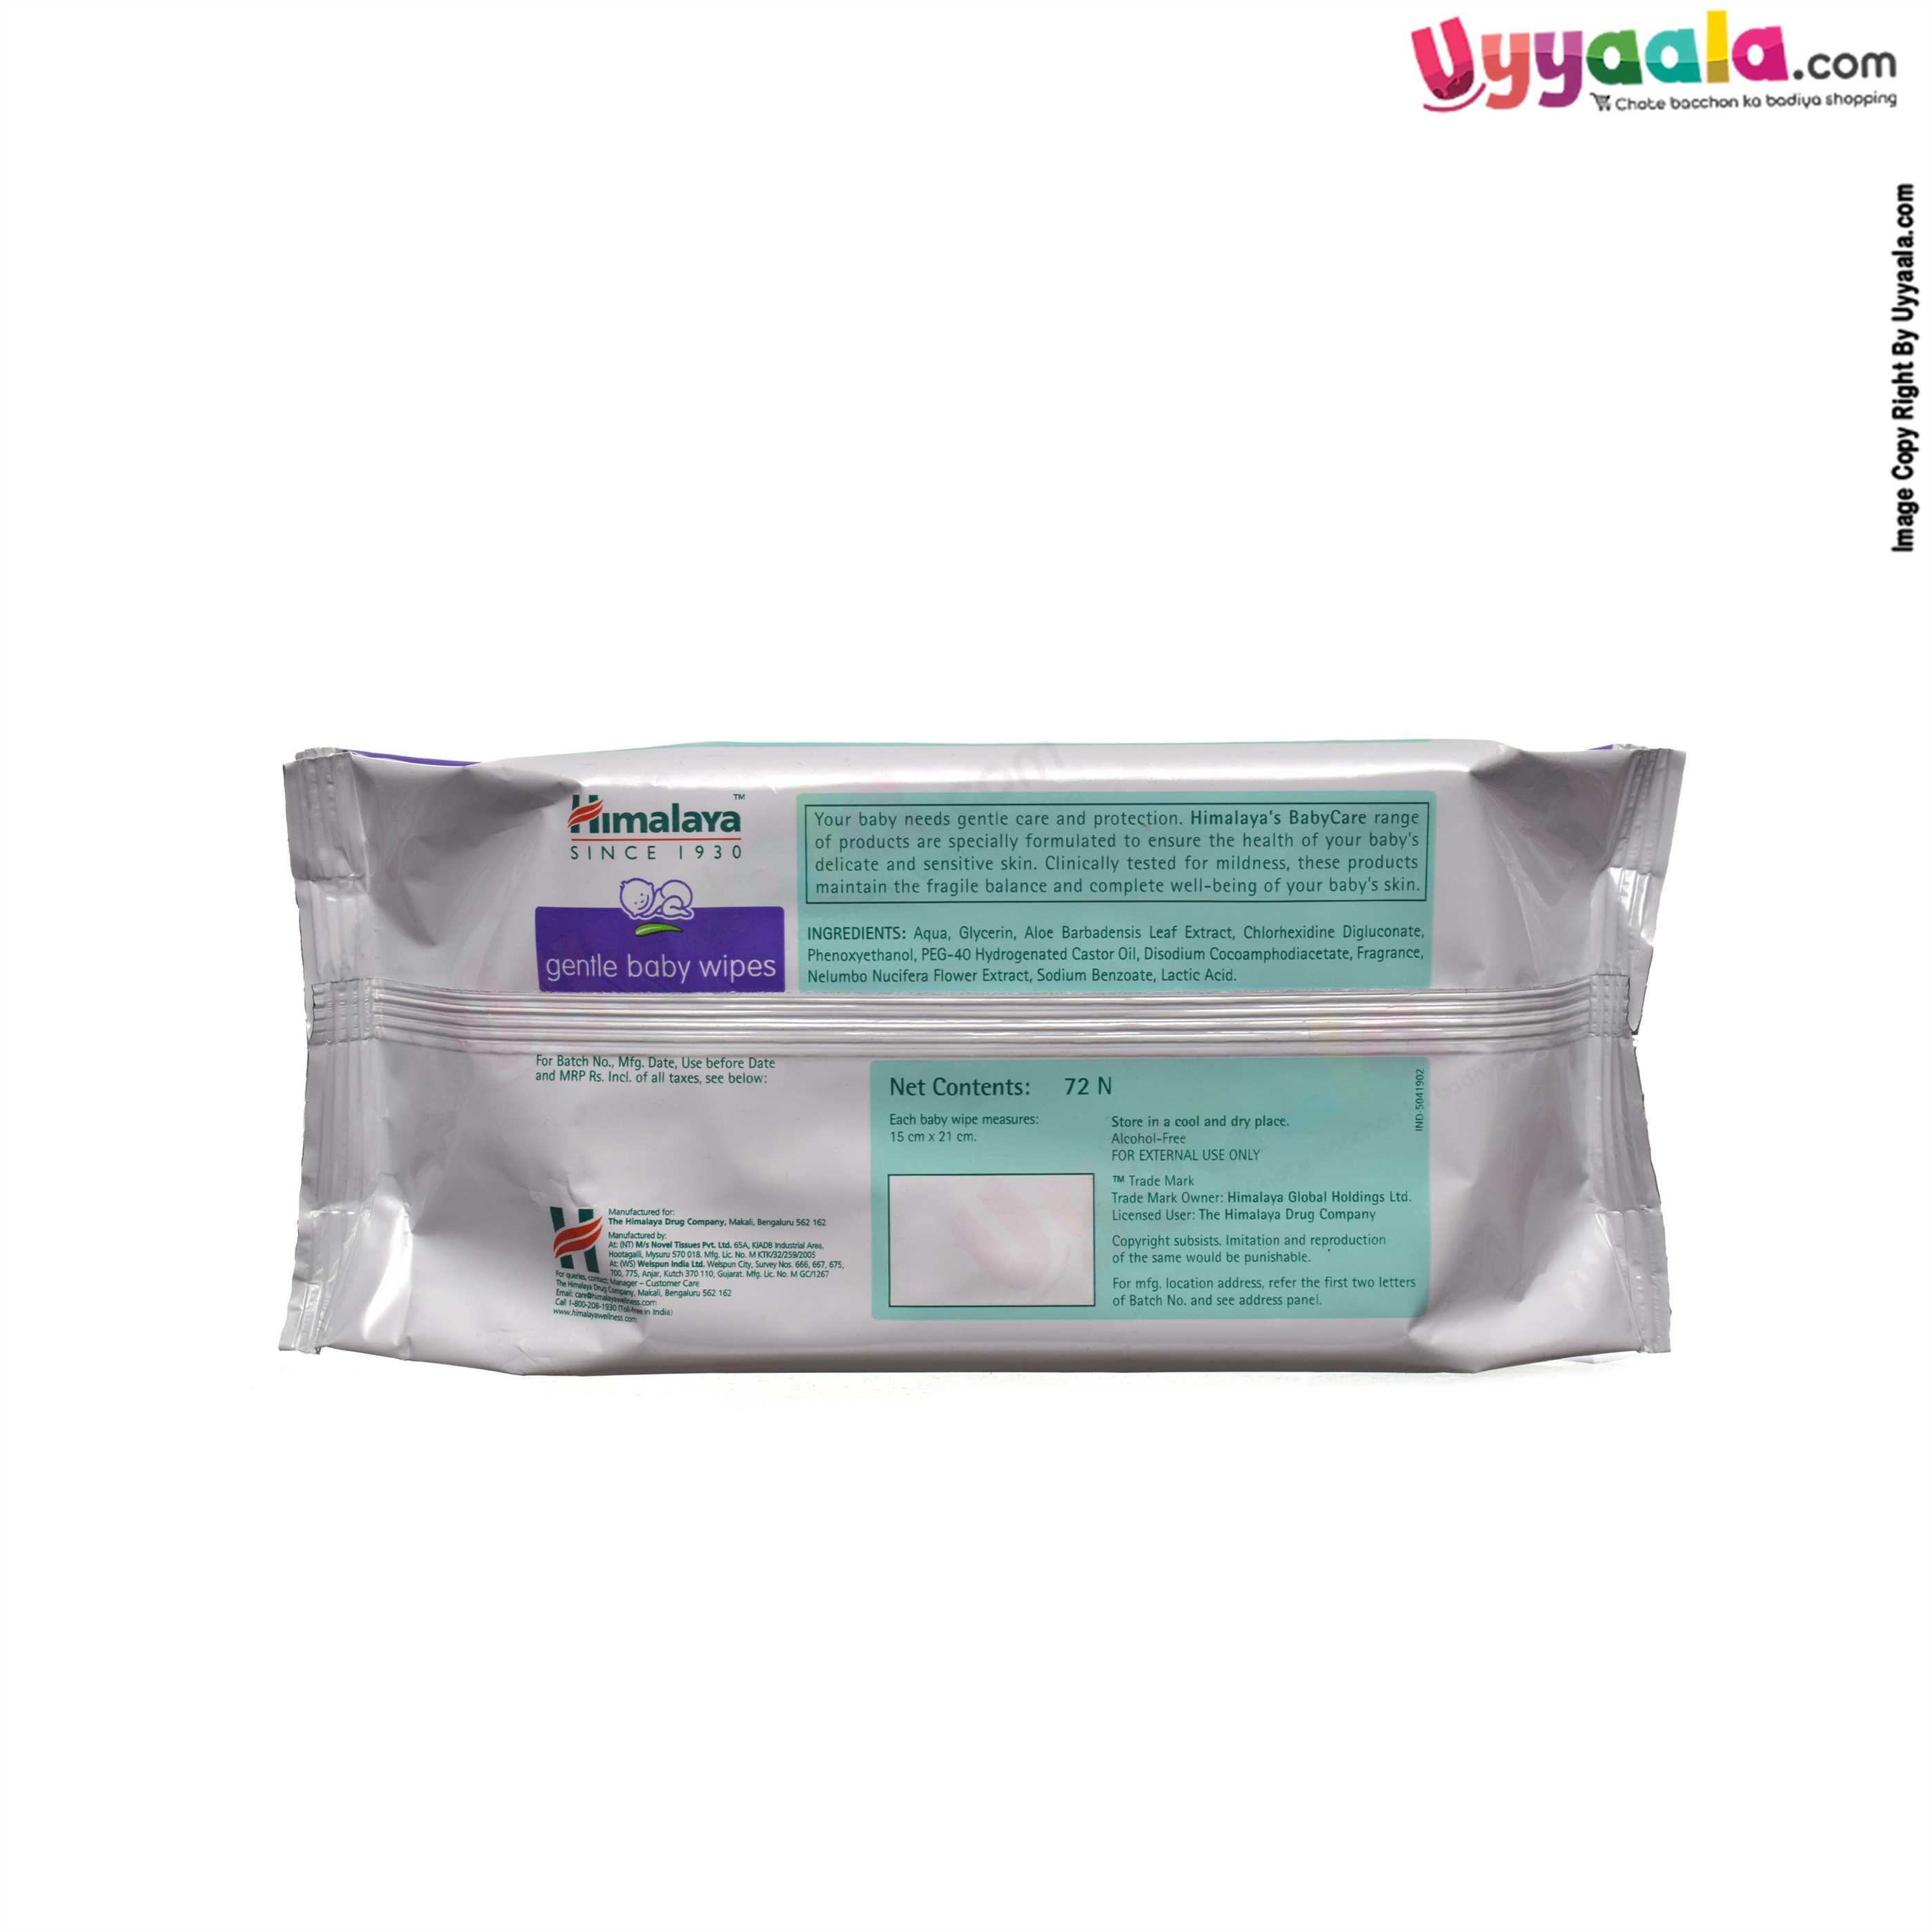 HIMALAYA Gentle baby wipes for normal skin - 72pcs